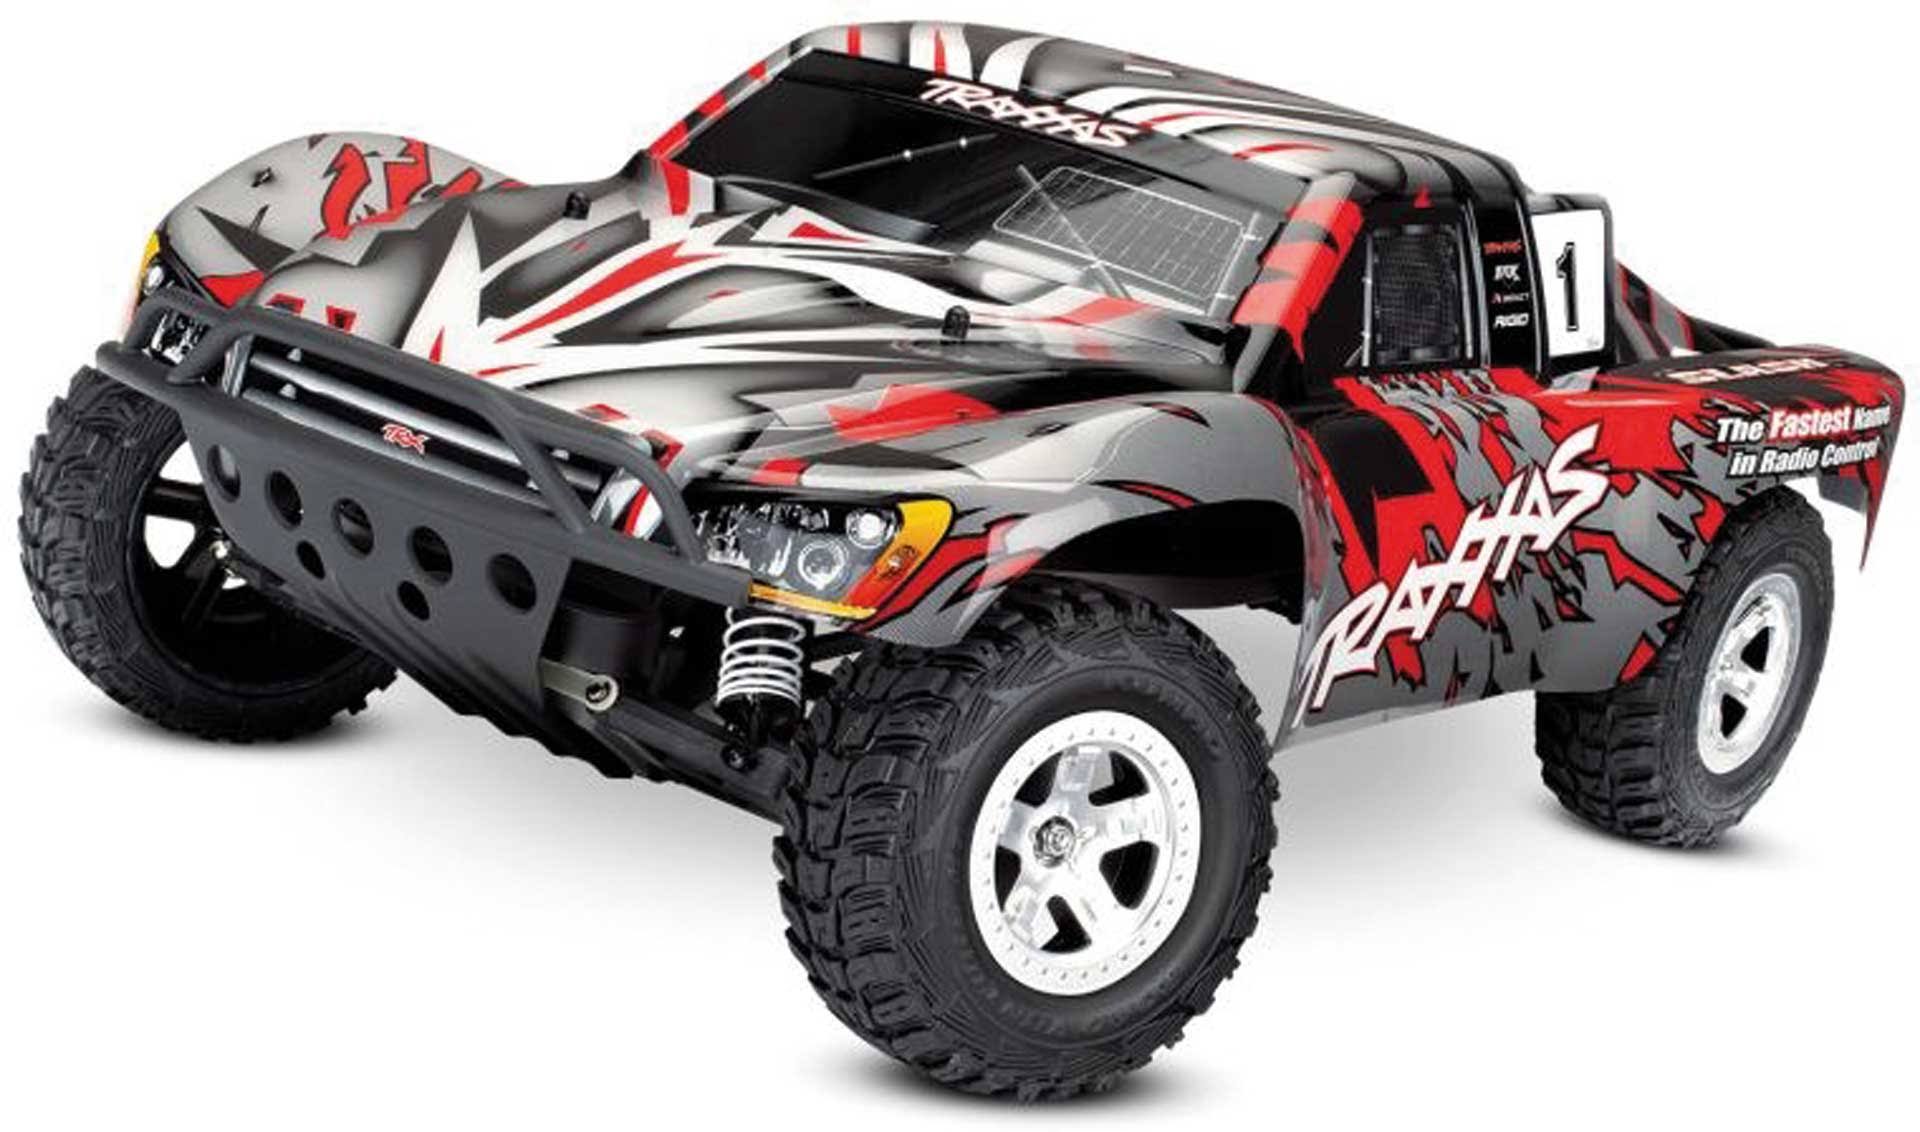 Traxxas Slash 2WD Short Course Racing Truck, Red